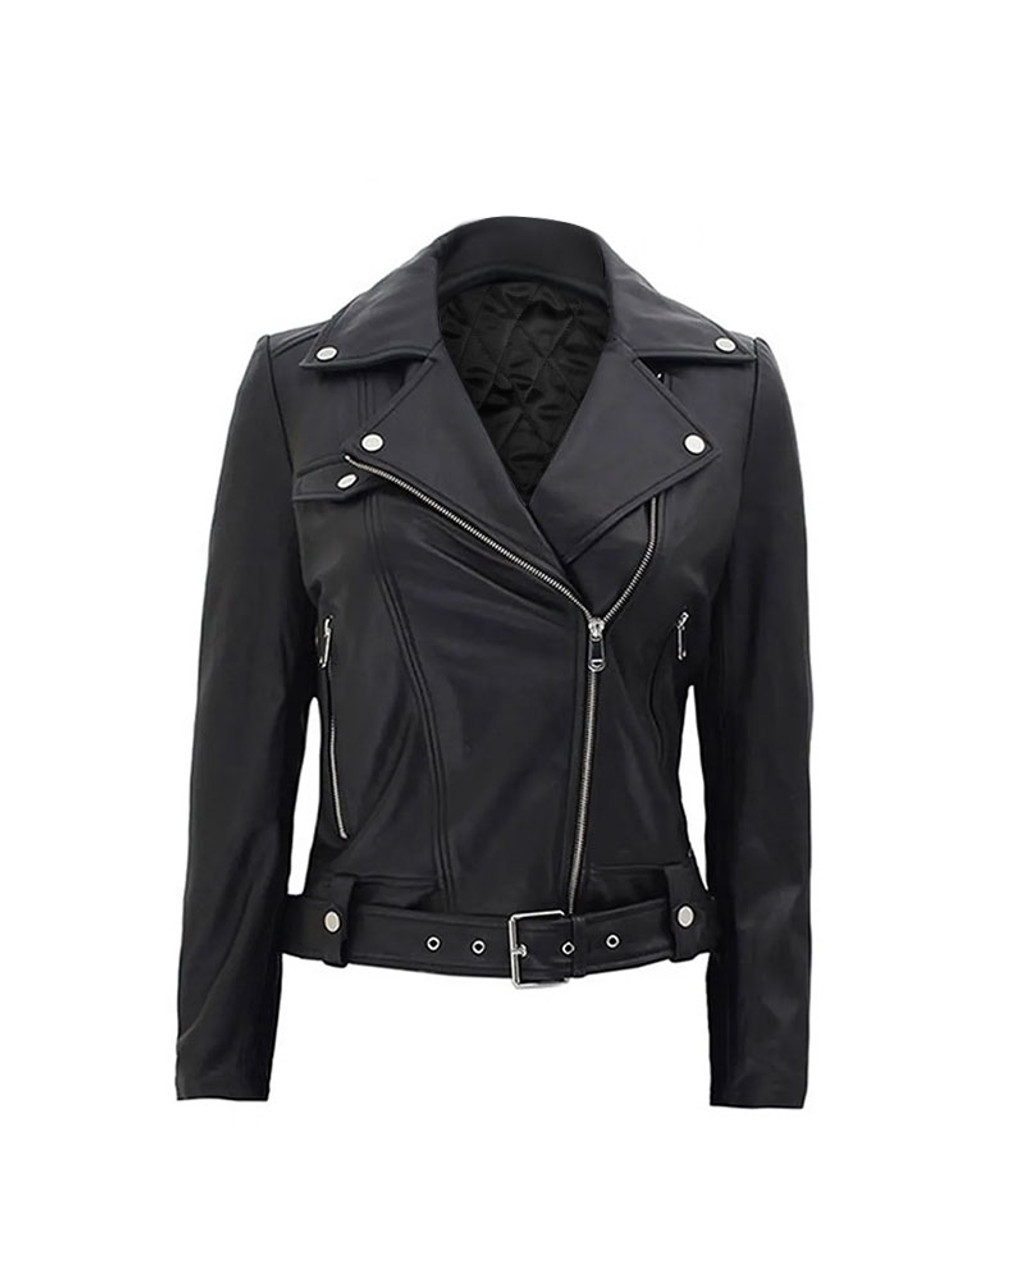 Buy Now - Nicolas Cage Pink Leather Biker Jacket With Patches